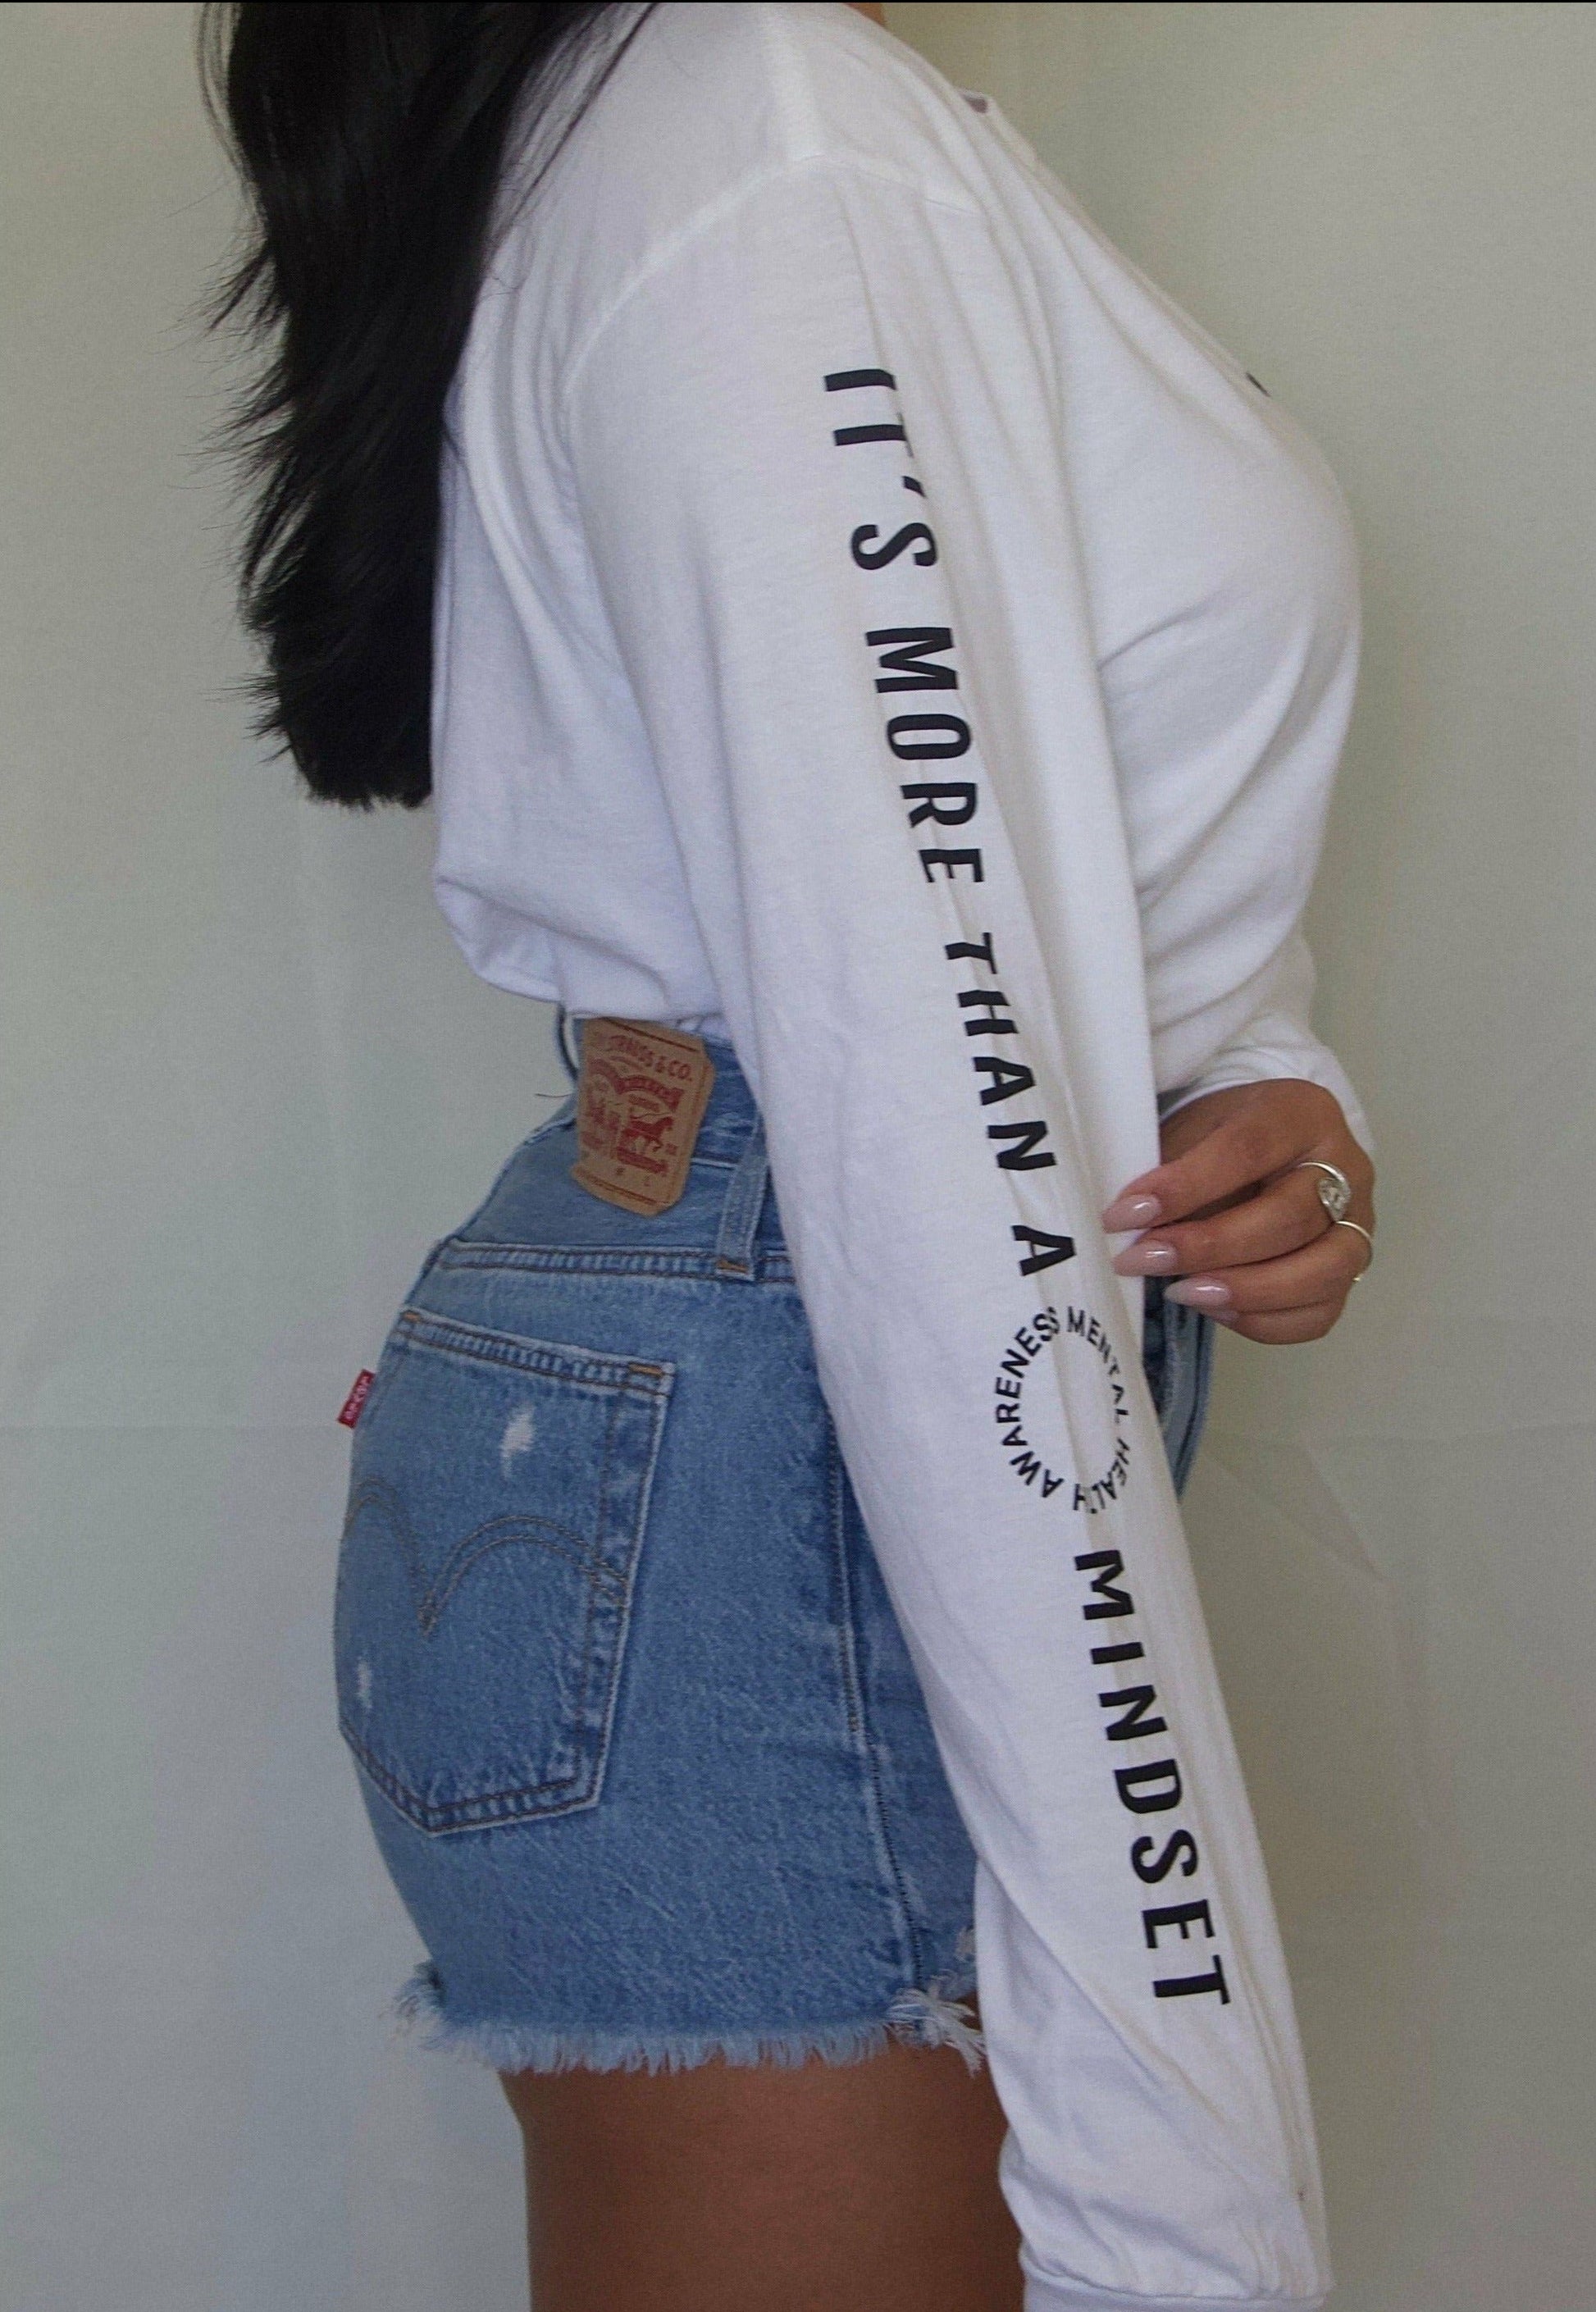 Involvd® It's More Than a Mindset Mental Health Awareness Unisex Long-Sleeve_Involvd Social Advocacy Clothing Brand